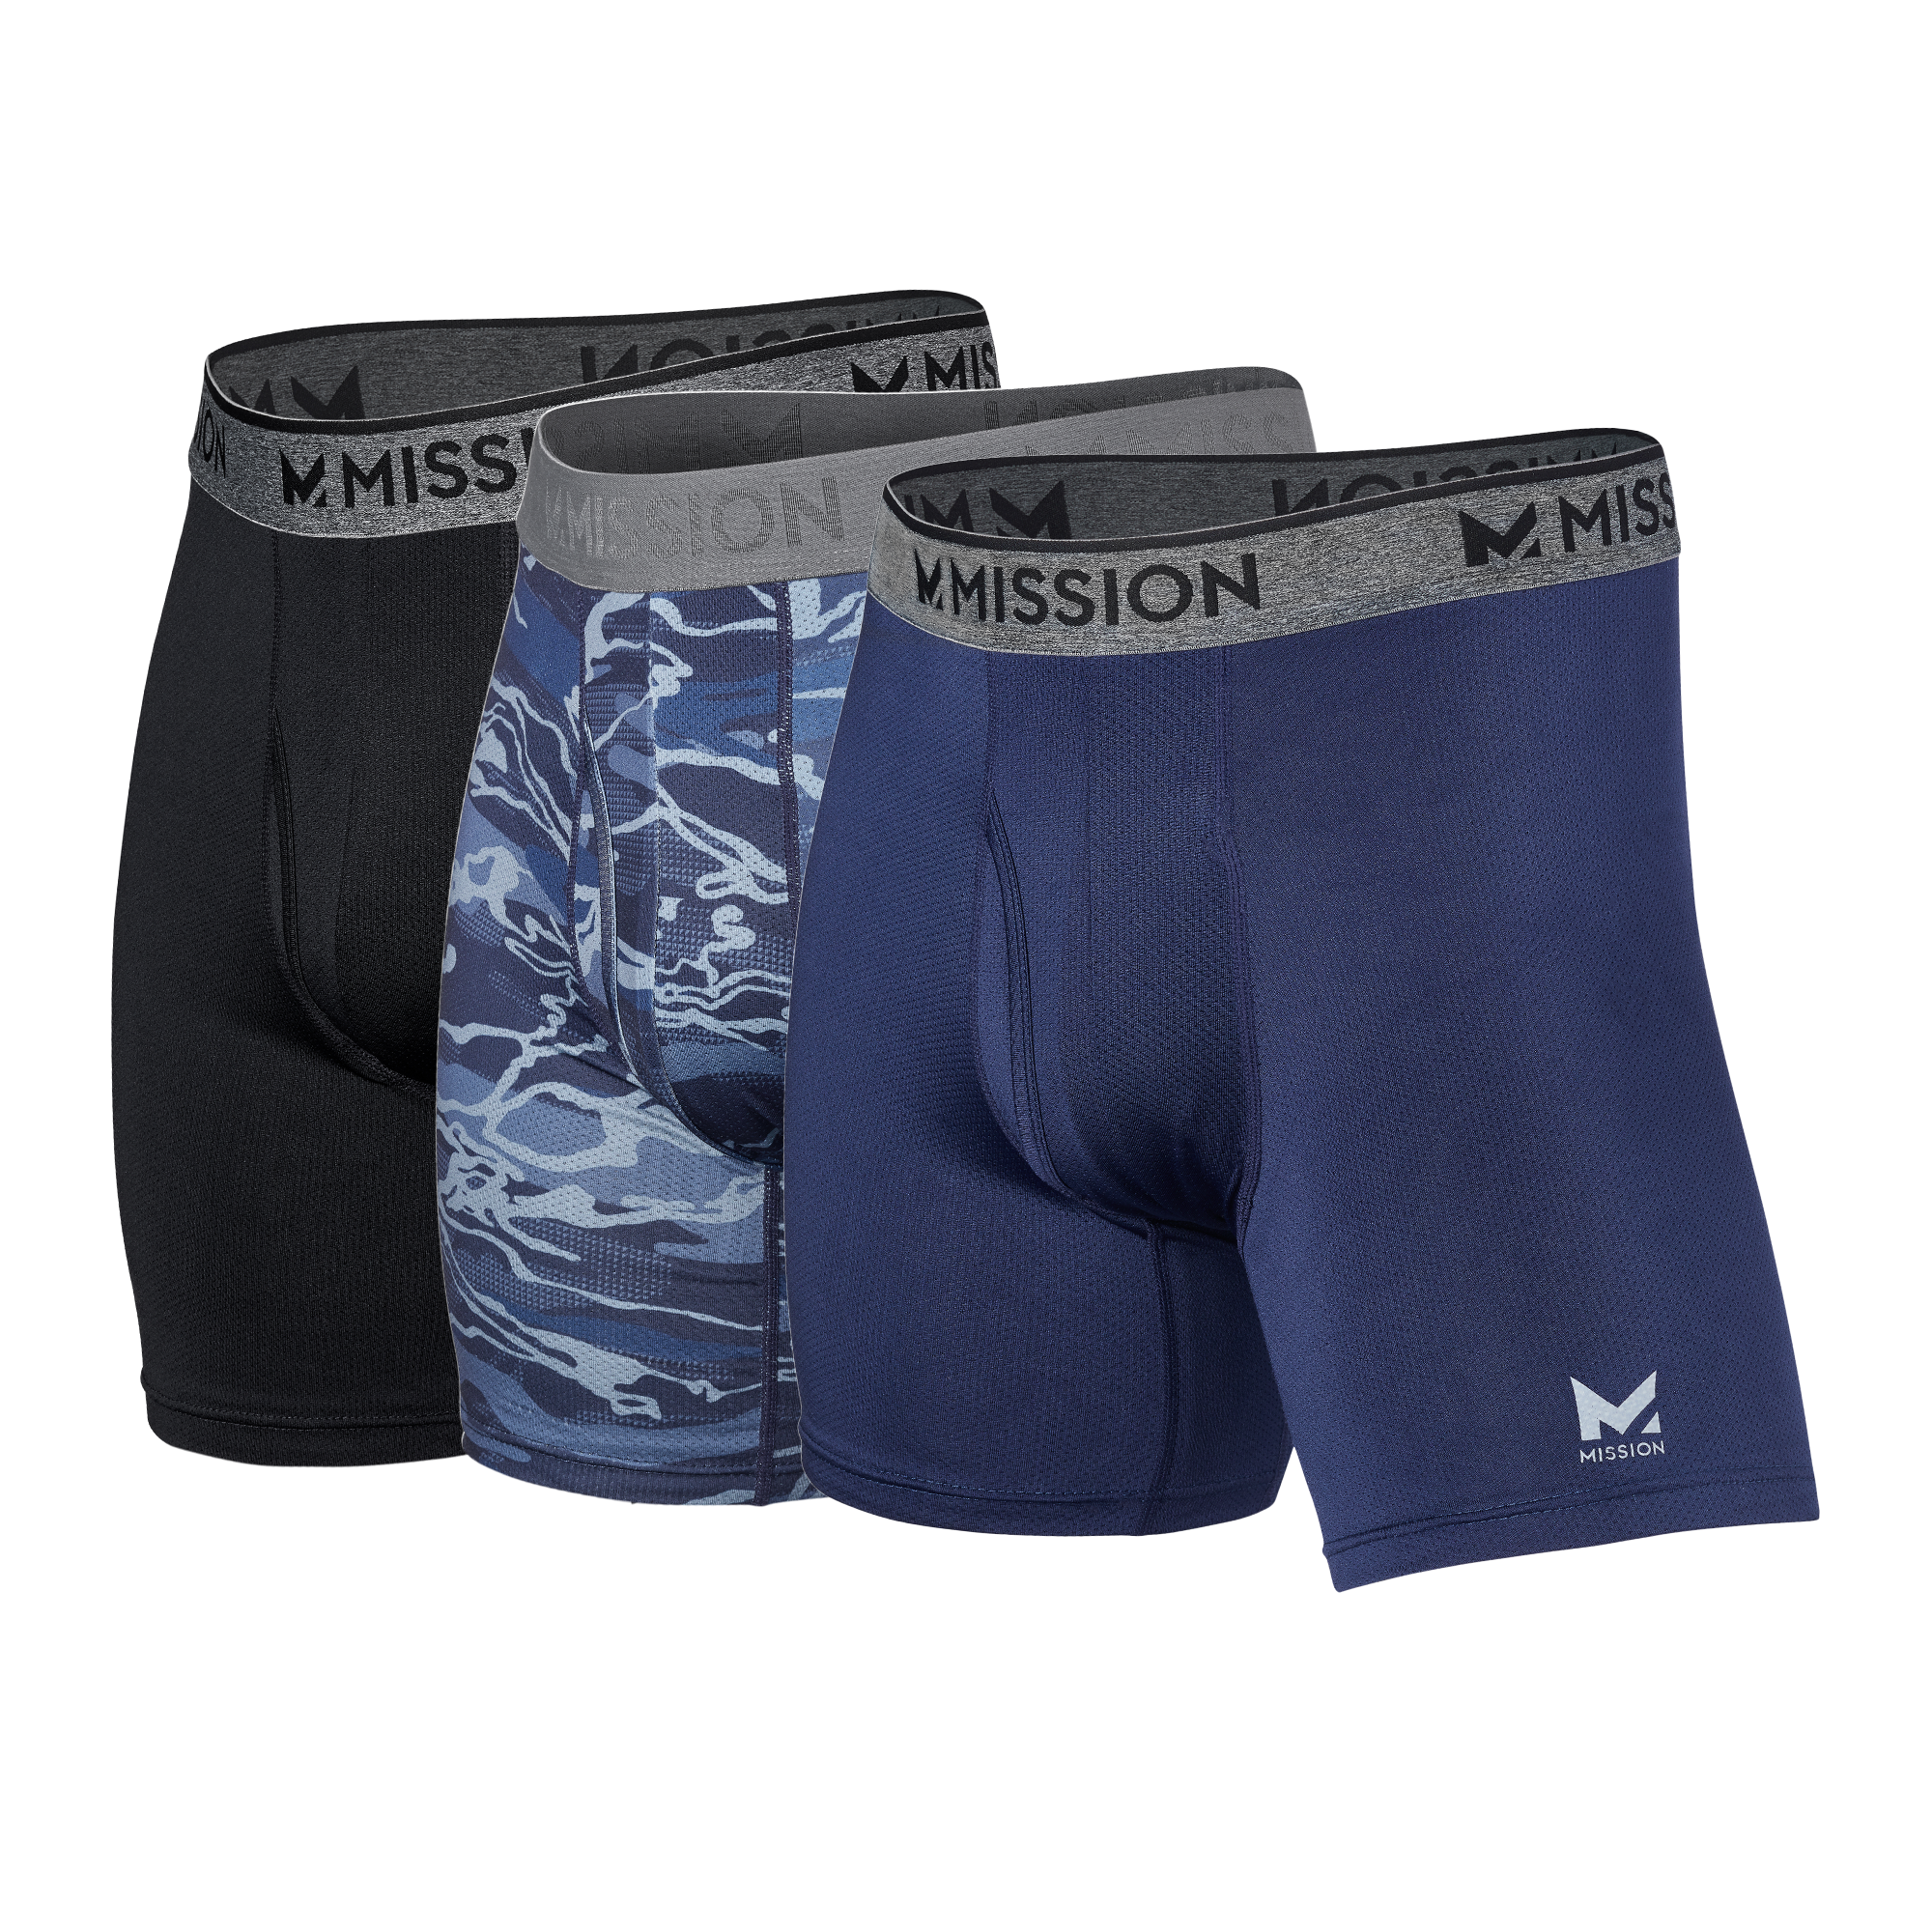 Image of Performance Mesh Boxer Brief (3pack)